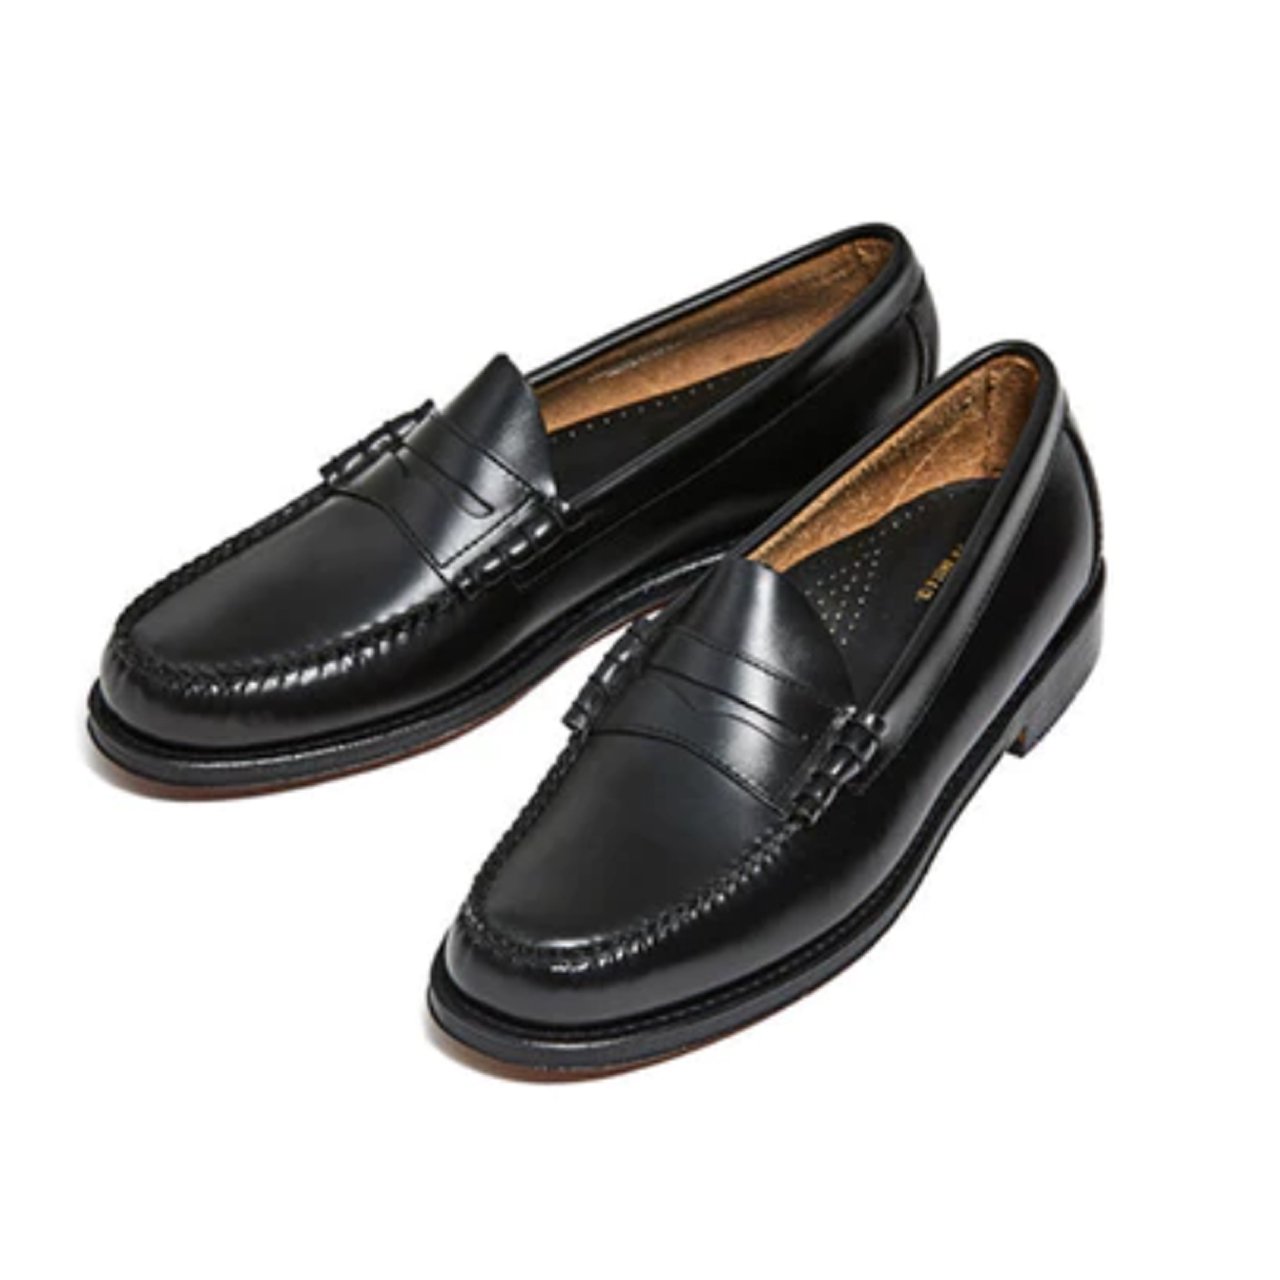 35%OFF G.H.BASS (ジーエイチバス)｜11010H WEEJUN HERITAGE LARSON MOC PENNY BLACK LEATHER SOLE